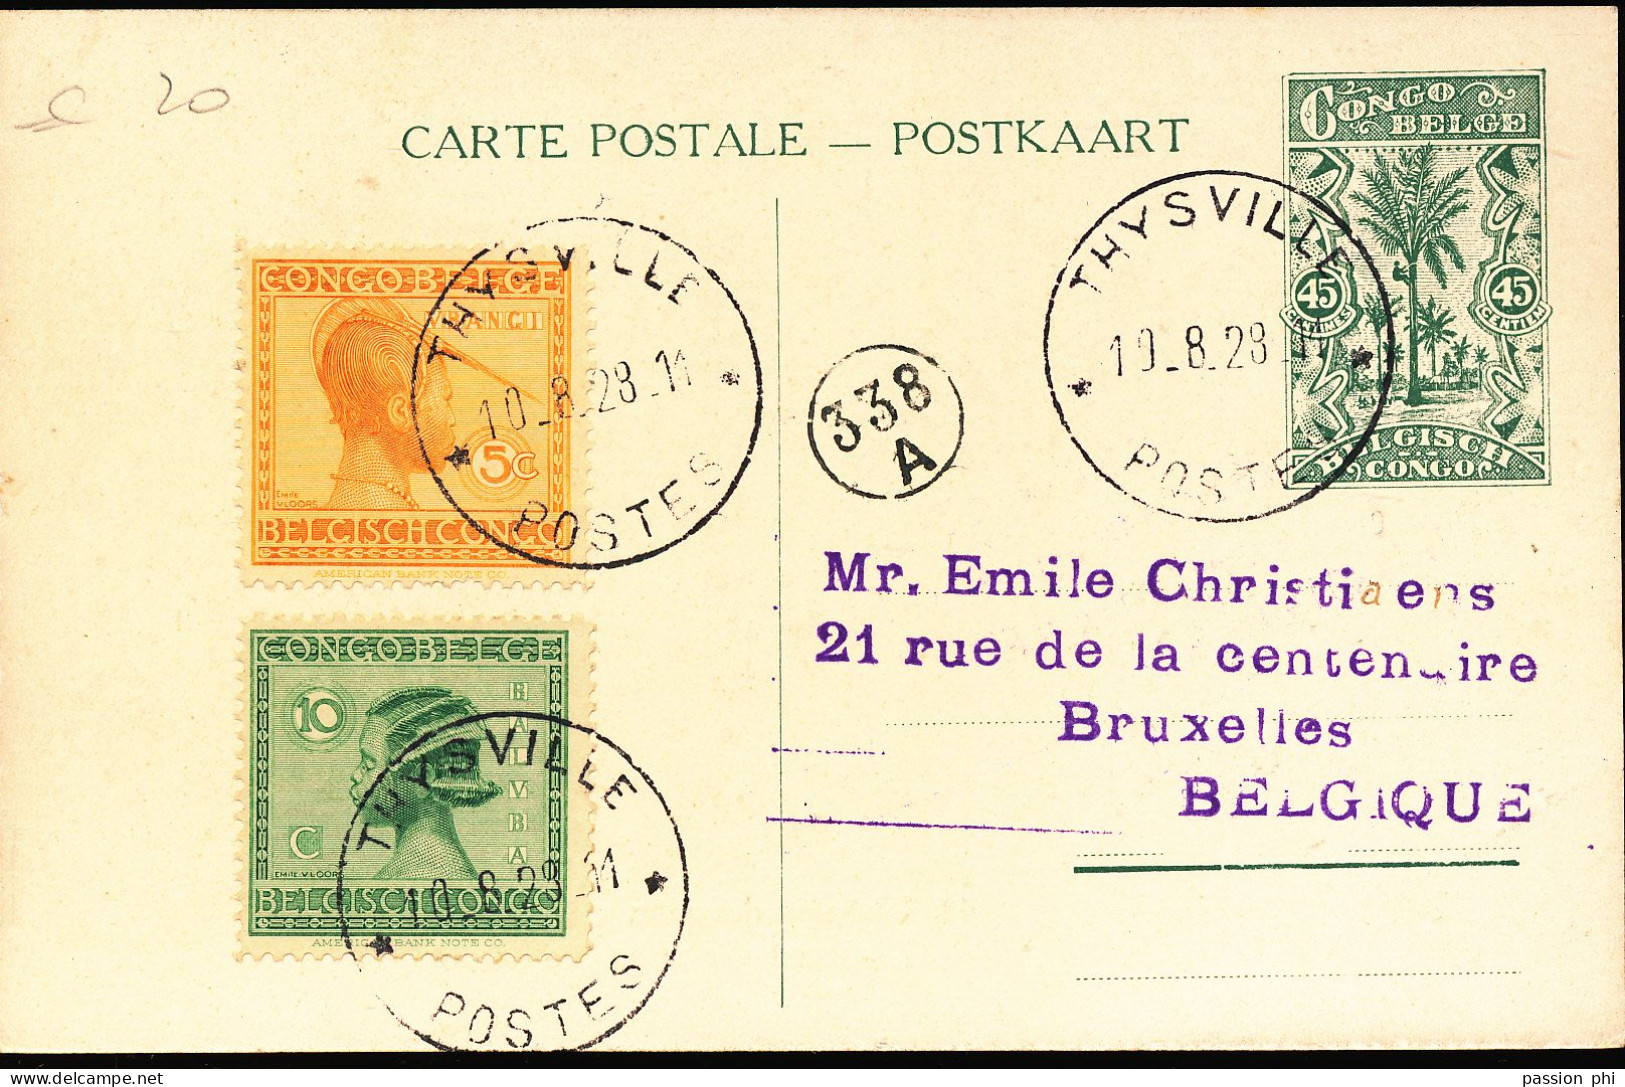 BELGIAN CONGO 1912 ISSUE PPS SBEP 66a VIEW 48 USED - Interi Postali